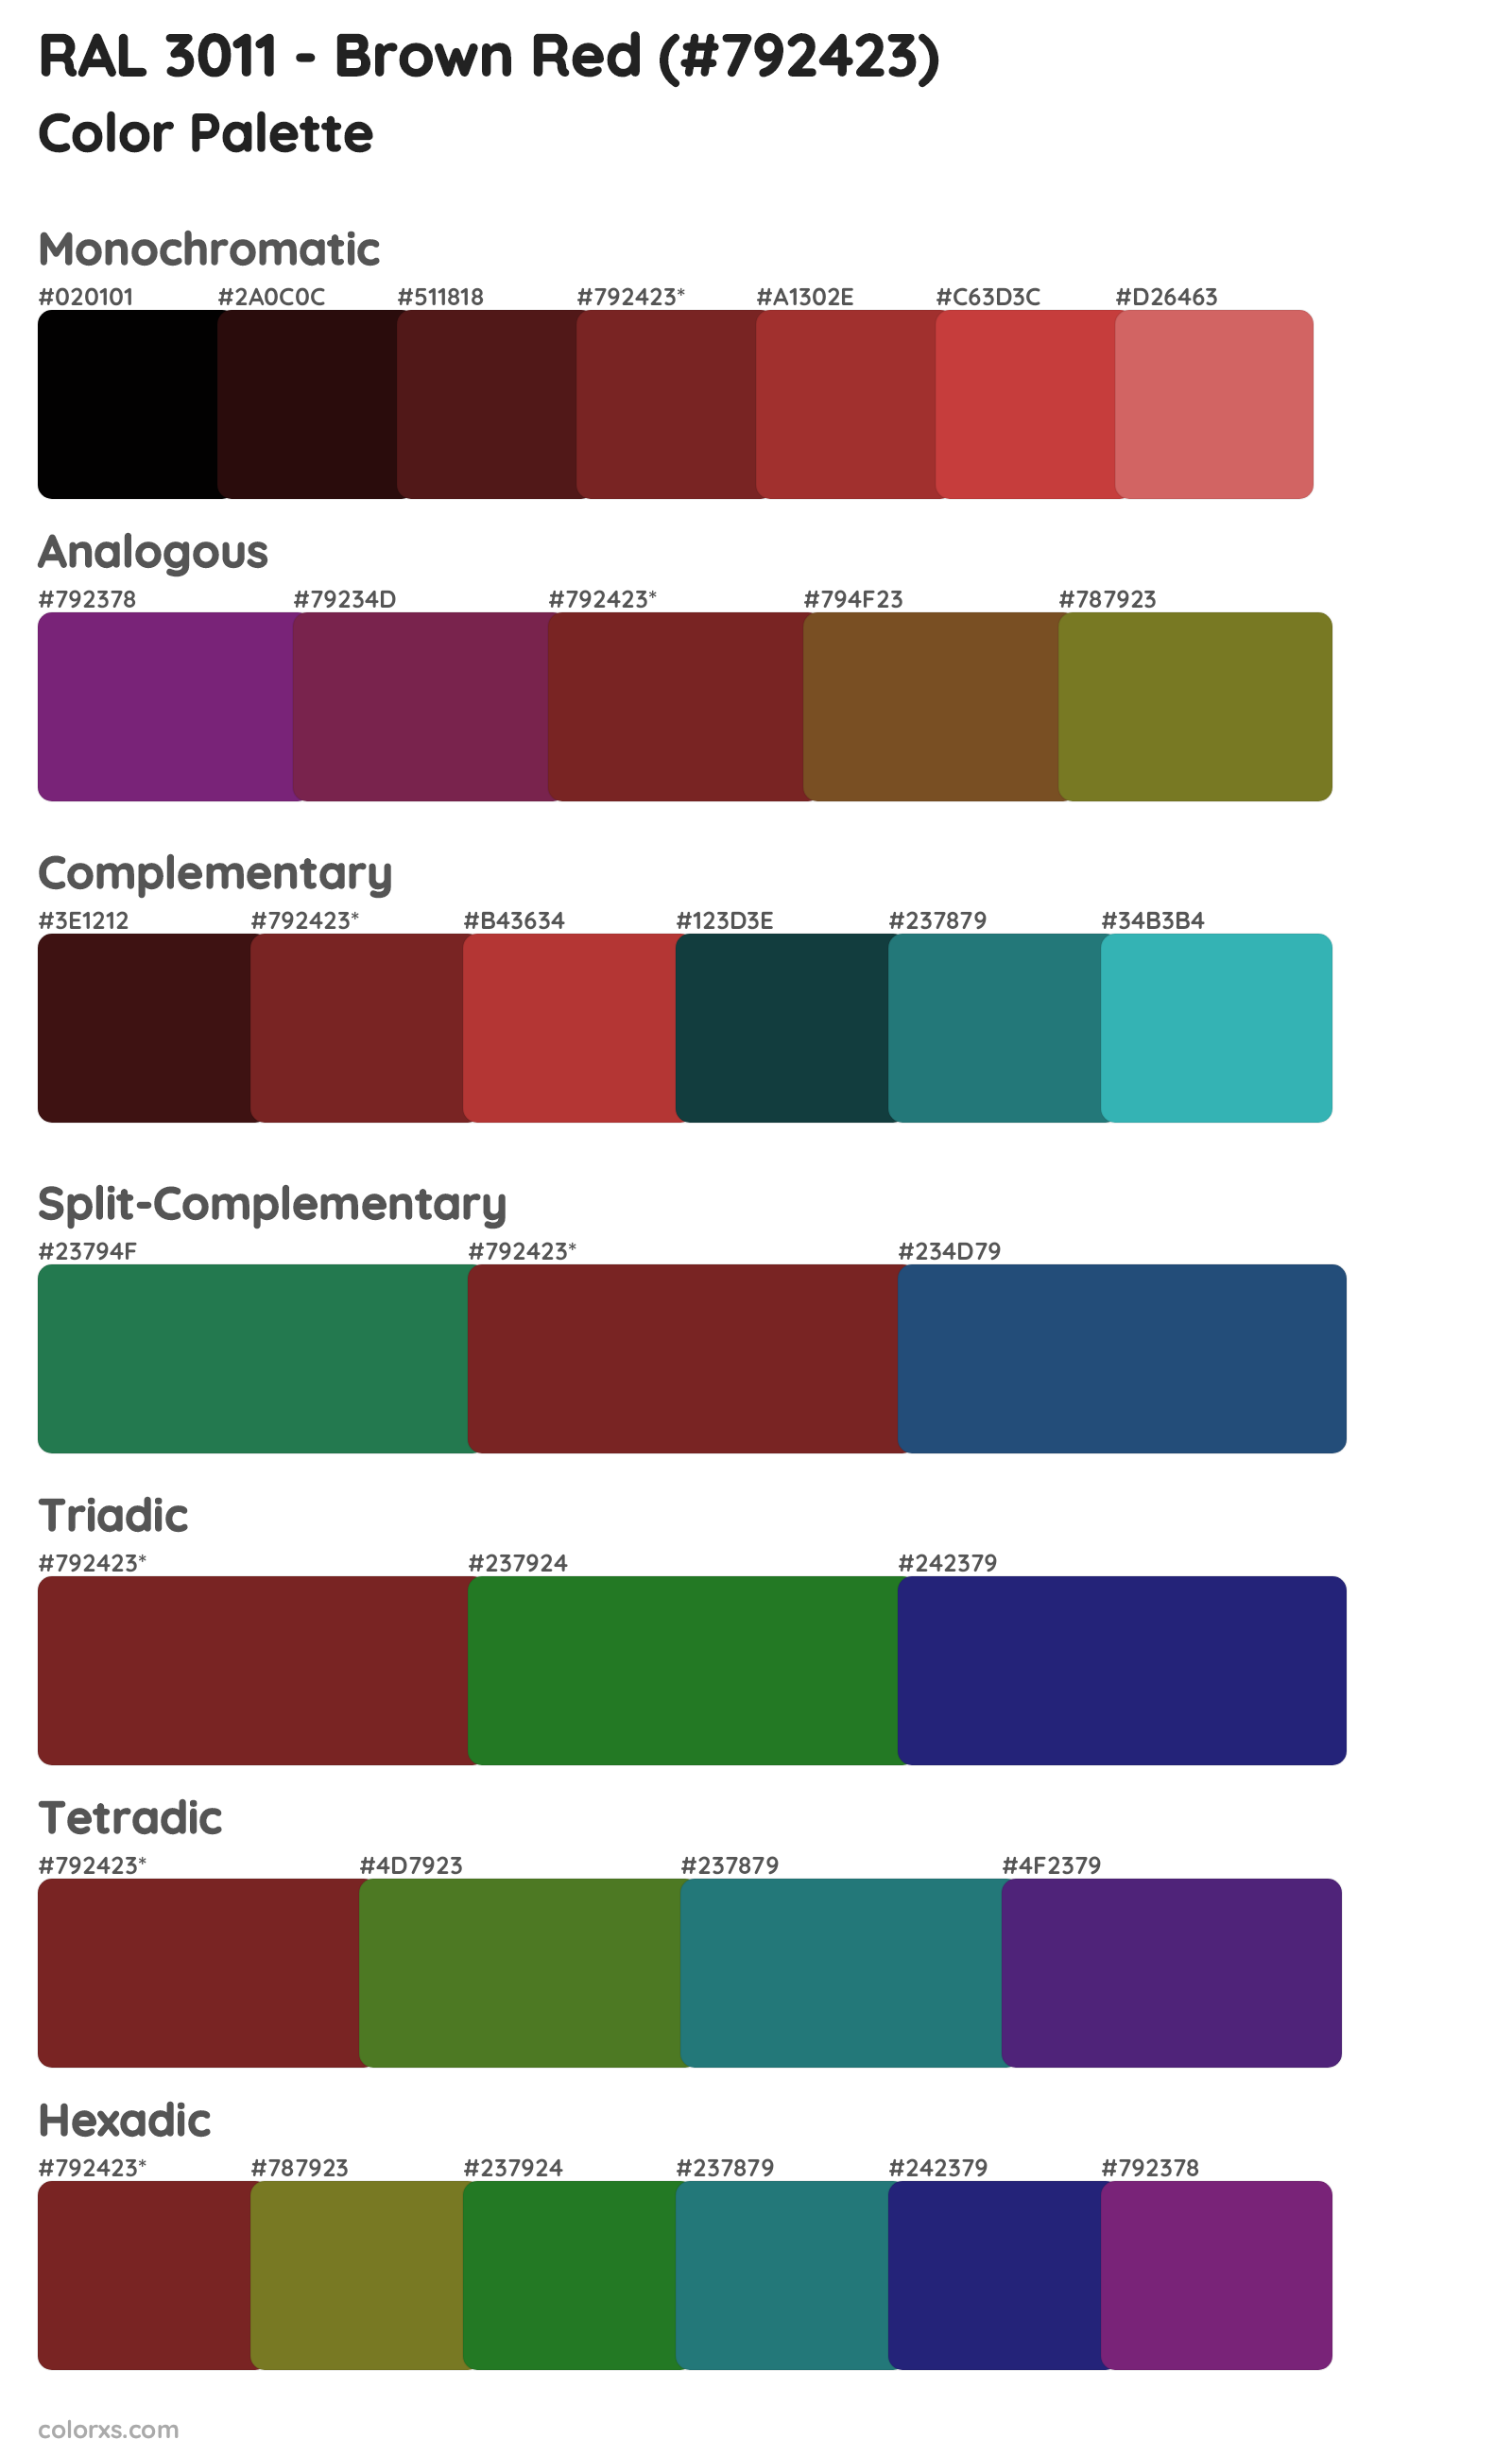 RAL 3011 - Brown Red Color Scheme Palettes